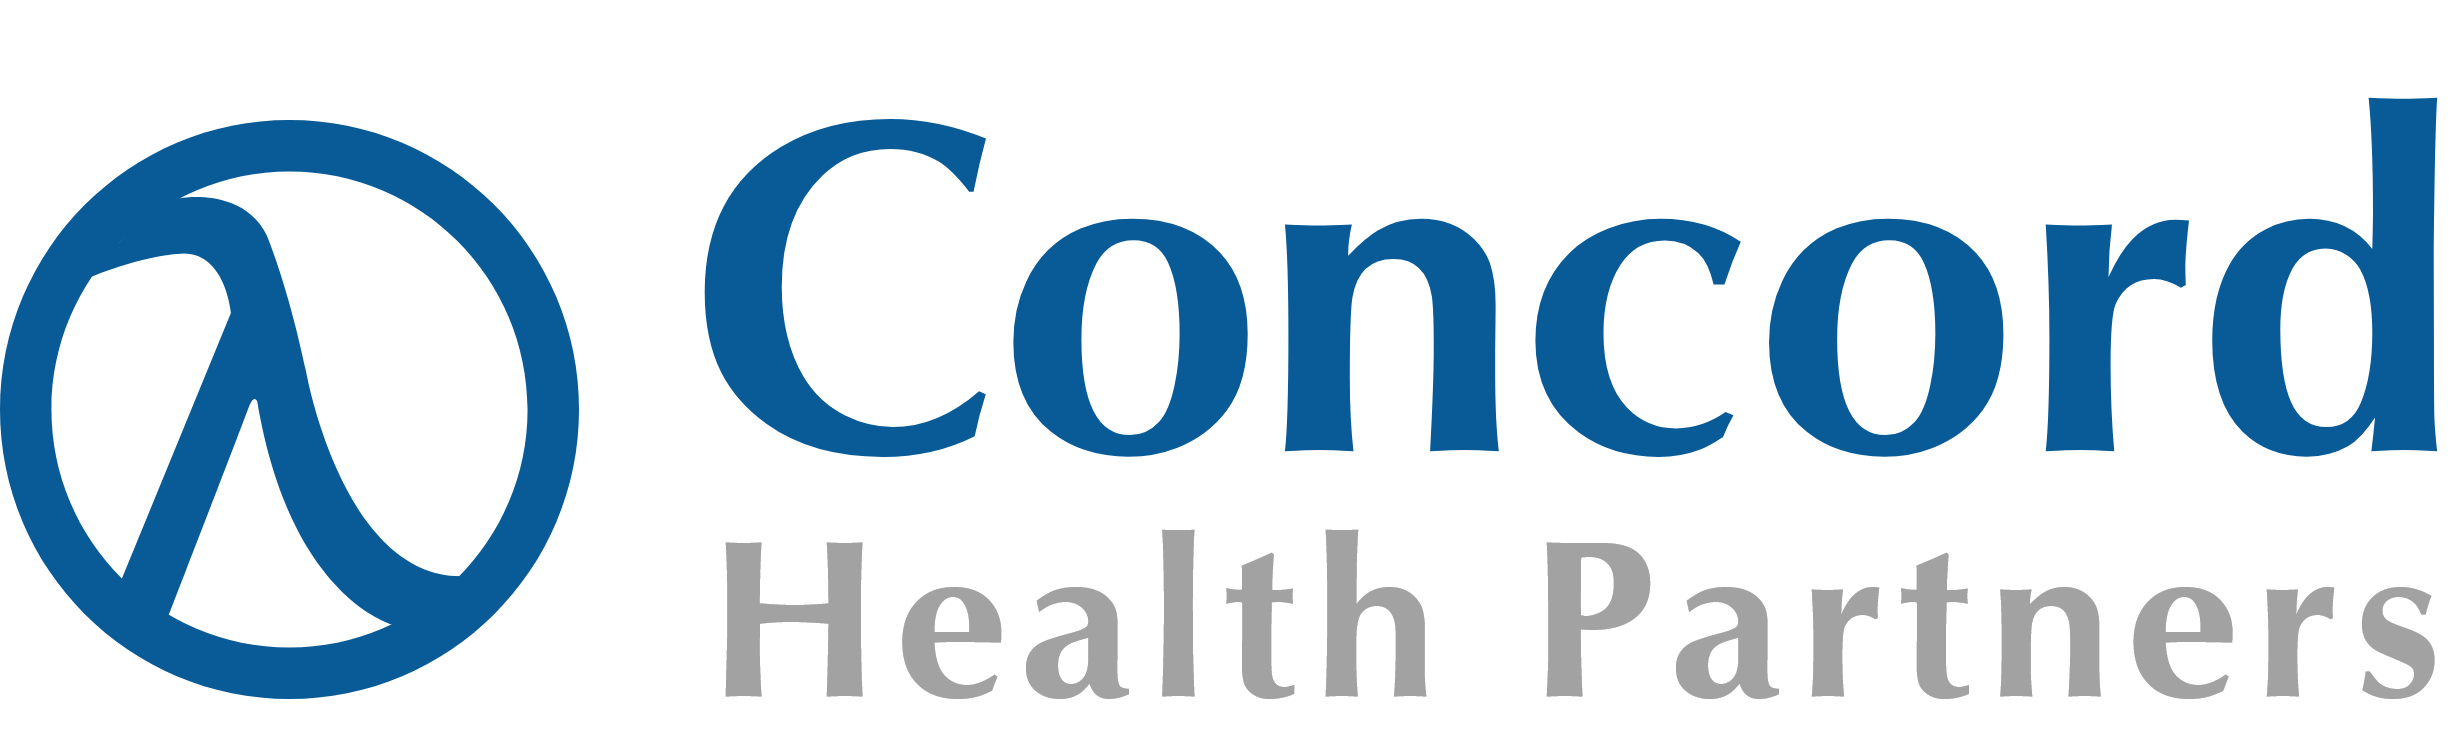 Why Legacy Nonprofit Sheppard Pratt Invested in PE Firm Concord Health Partners’ Funds